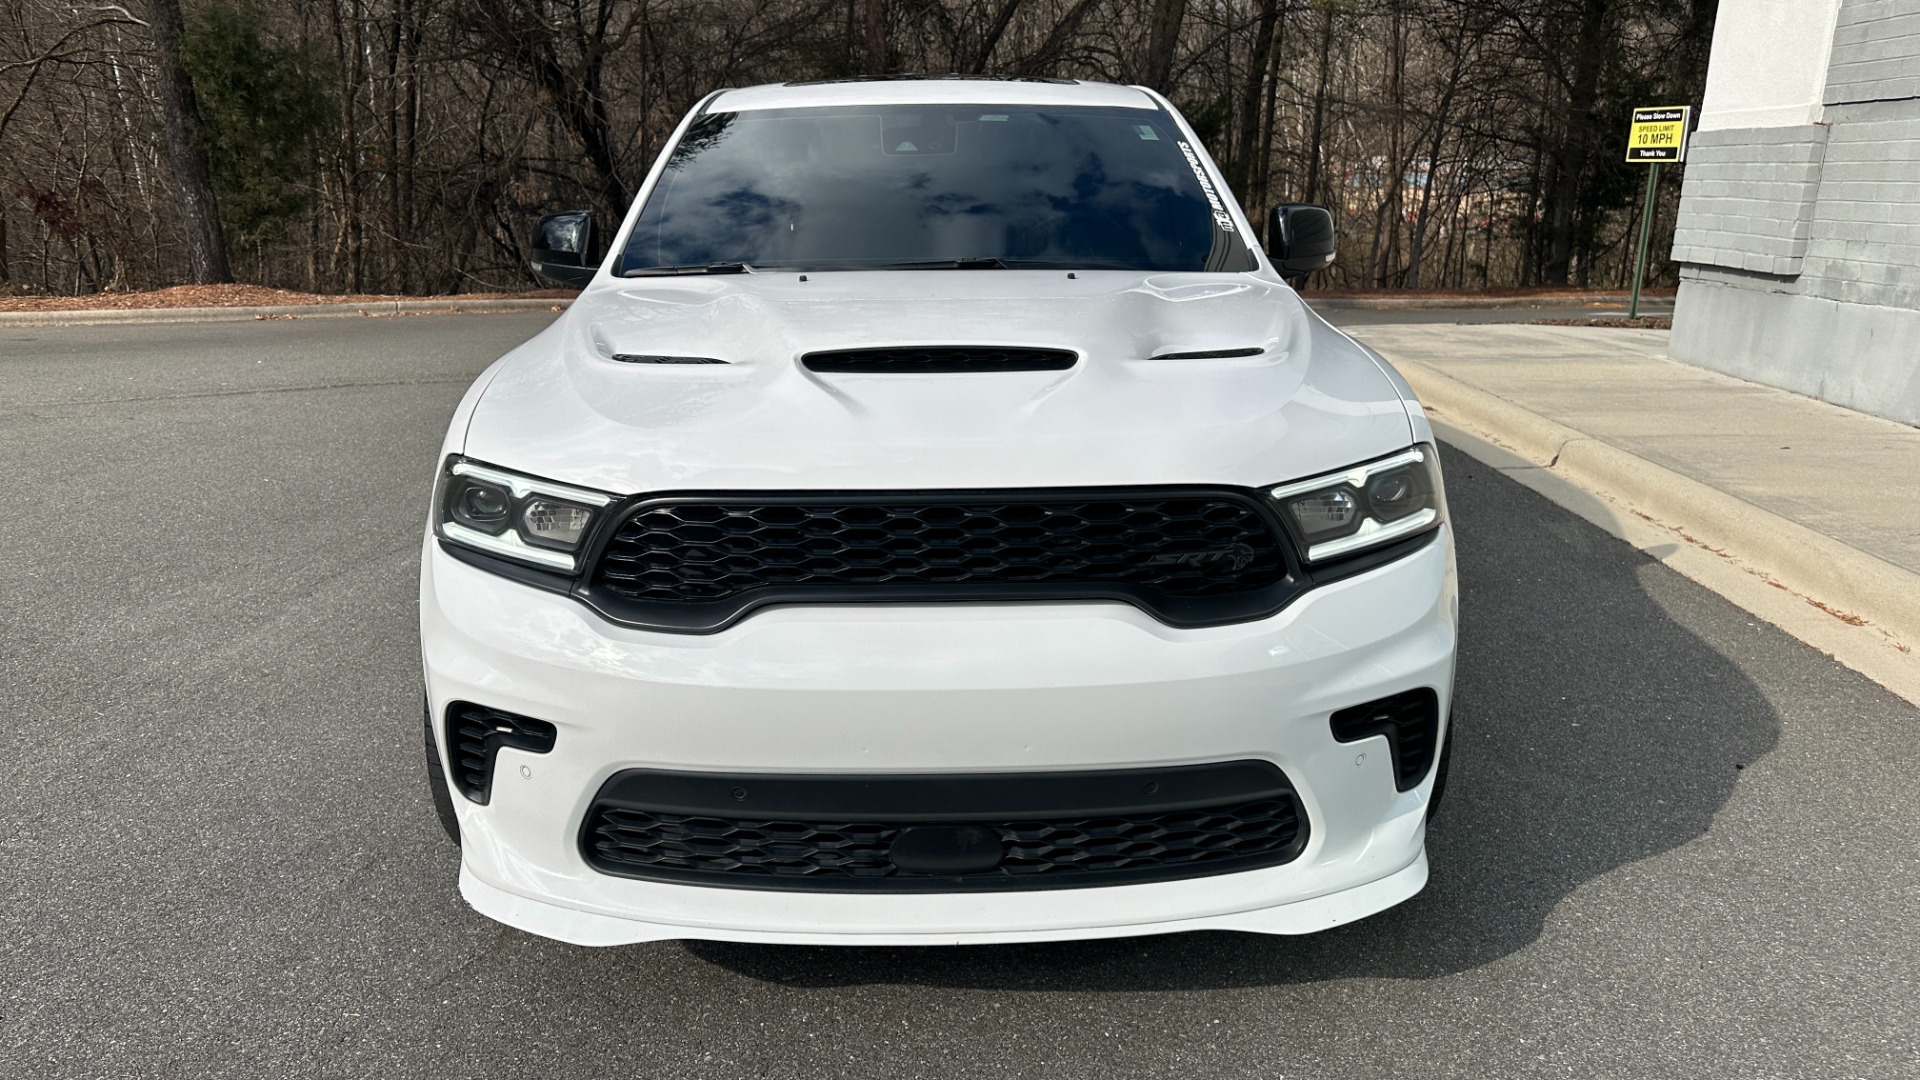 Used 2021 Dodge Durango SRT HELLCAT / CAPTAIN CHAIRS / DVD SCREENS / INTAKE / PULLEY for sale $98,495 at Formula Imports in Charlotte NC 28227 8